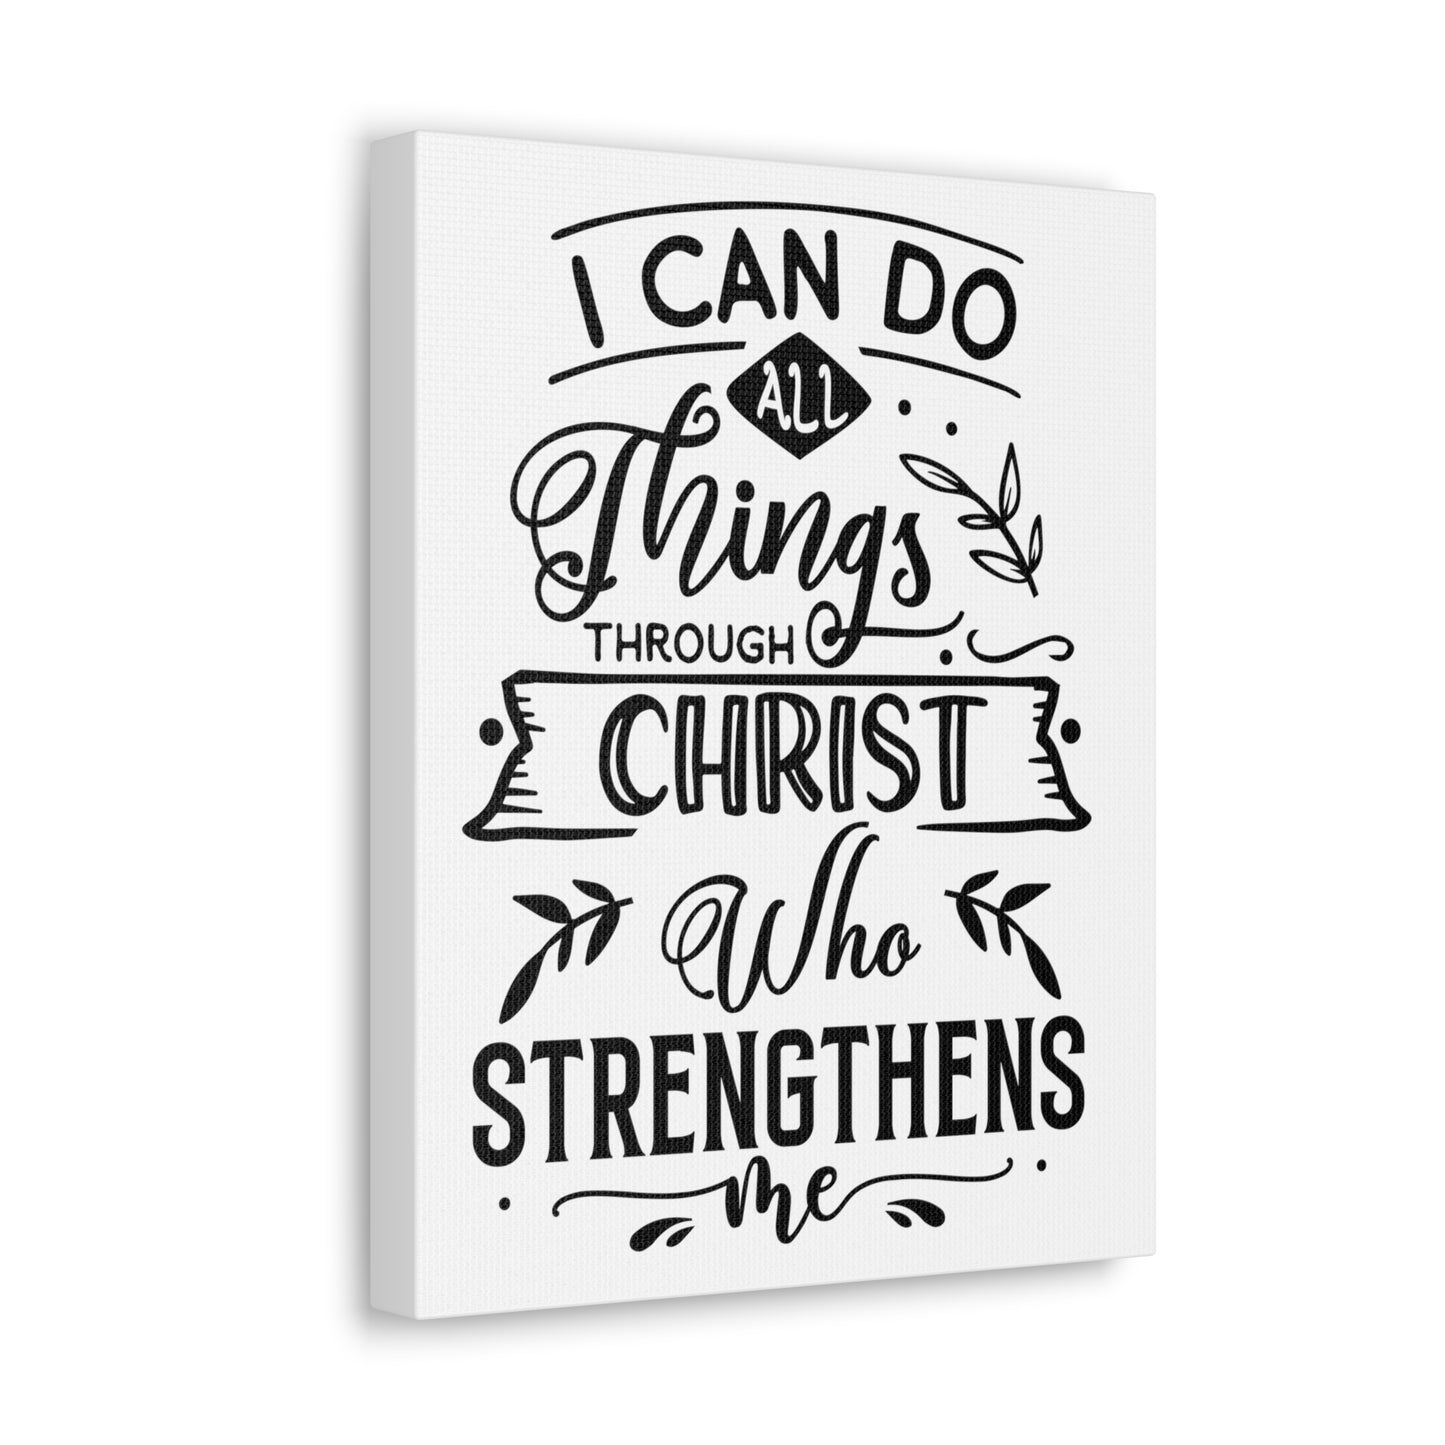 I can do all things through Christ who strengthens me Canvas Gallery Wraps